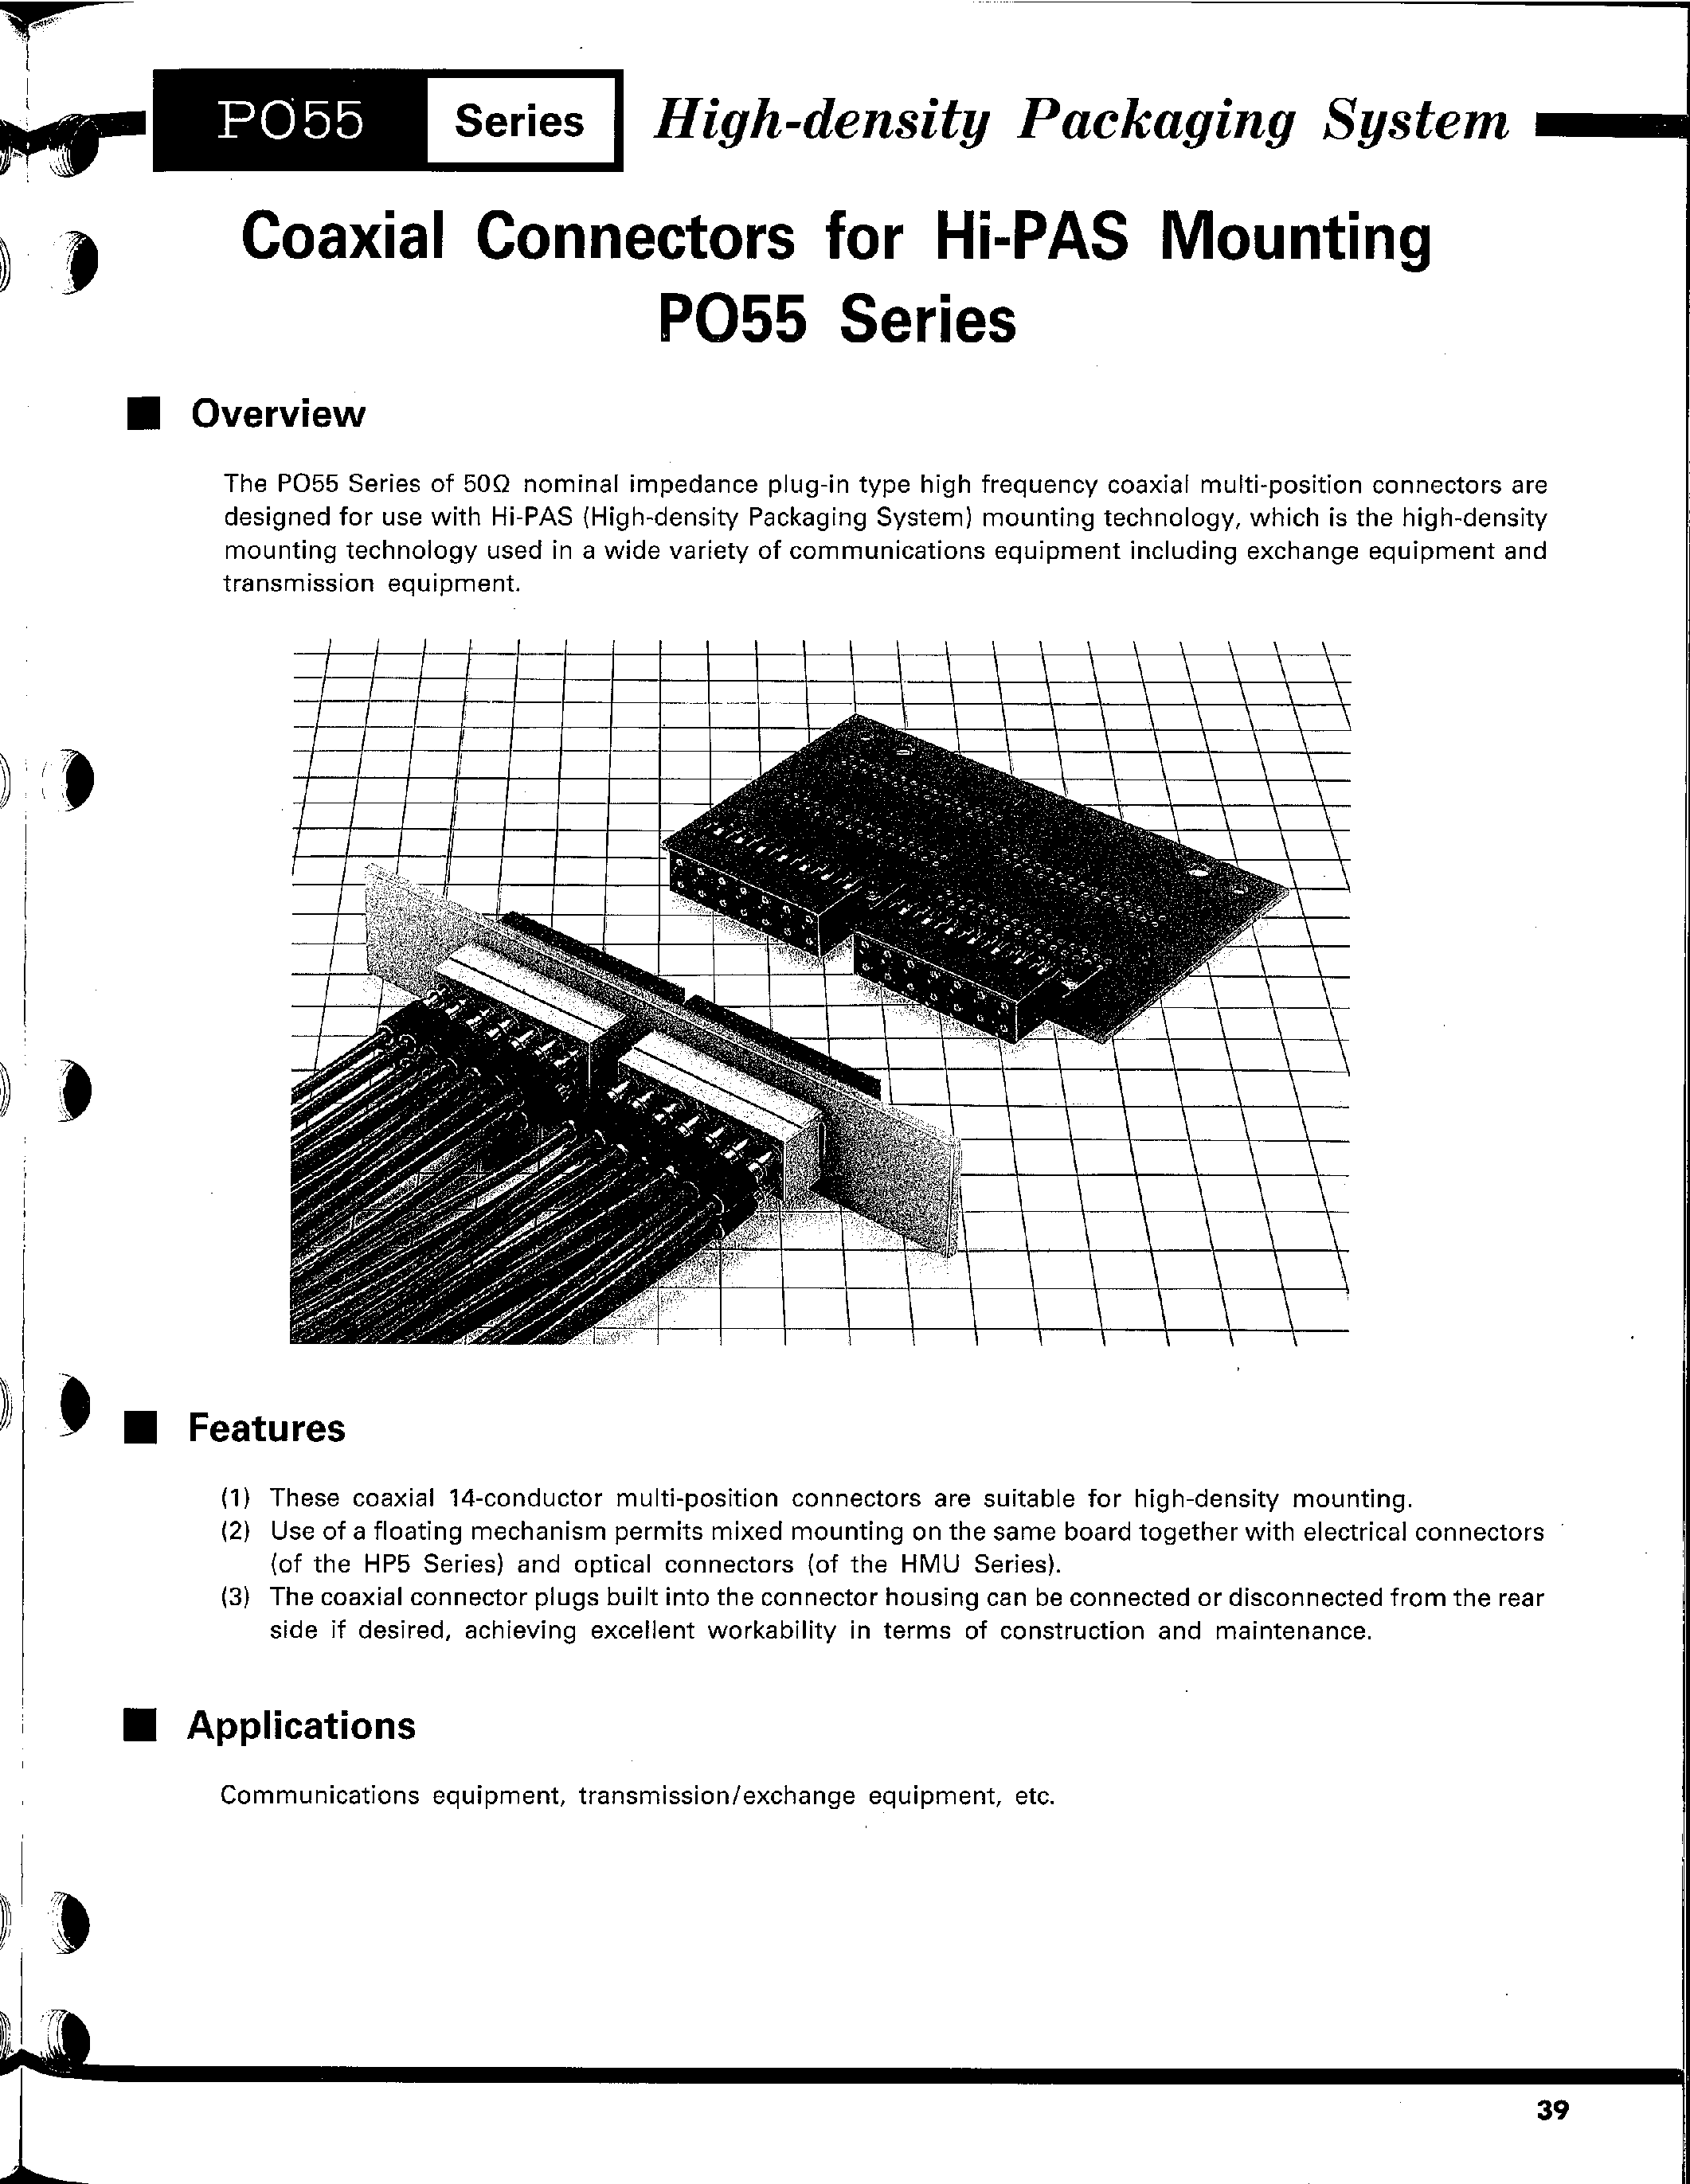 Datasheet PO55-14LR-PC-Z - High-density Packaging System(Coaxial Connectors for Hi-PAS Mounting) page 1